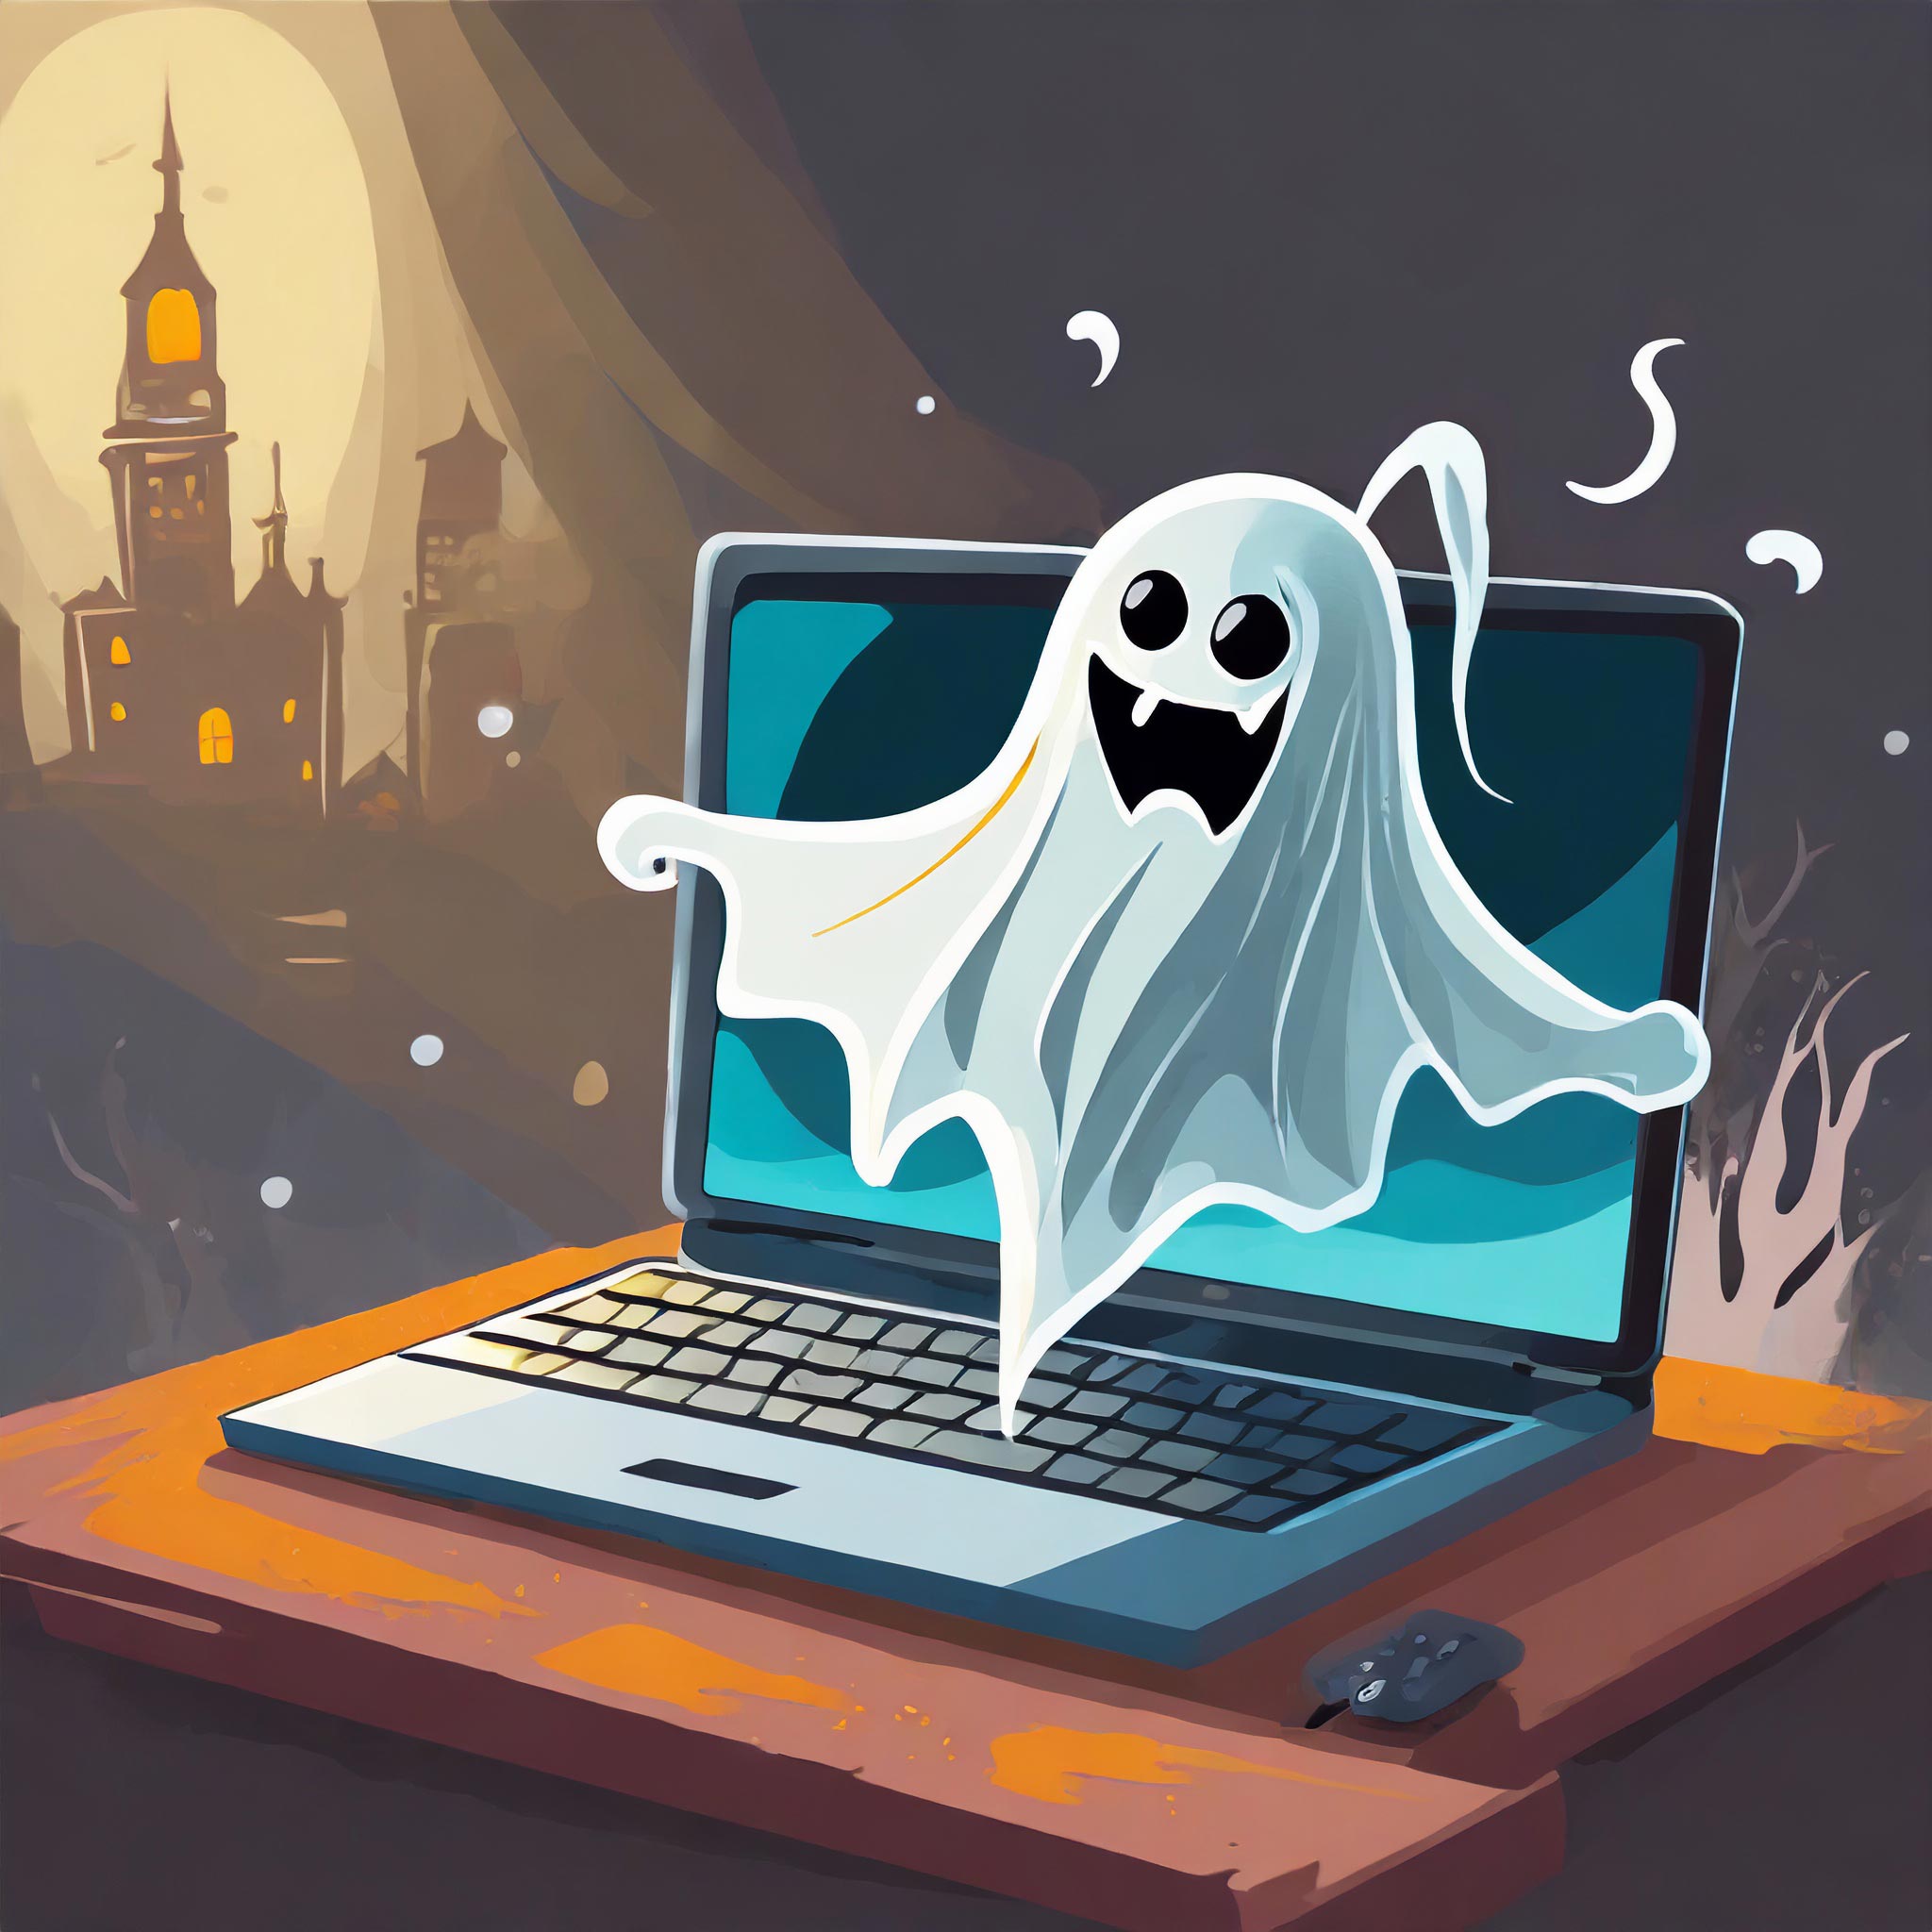 Read more about the article Web Scares and Nightmares: Unearthly Website Best Practices for a Spooky Halloween